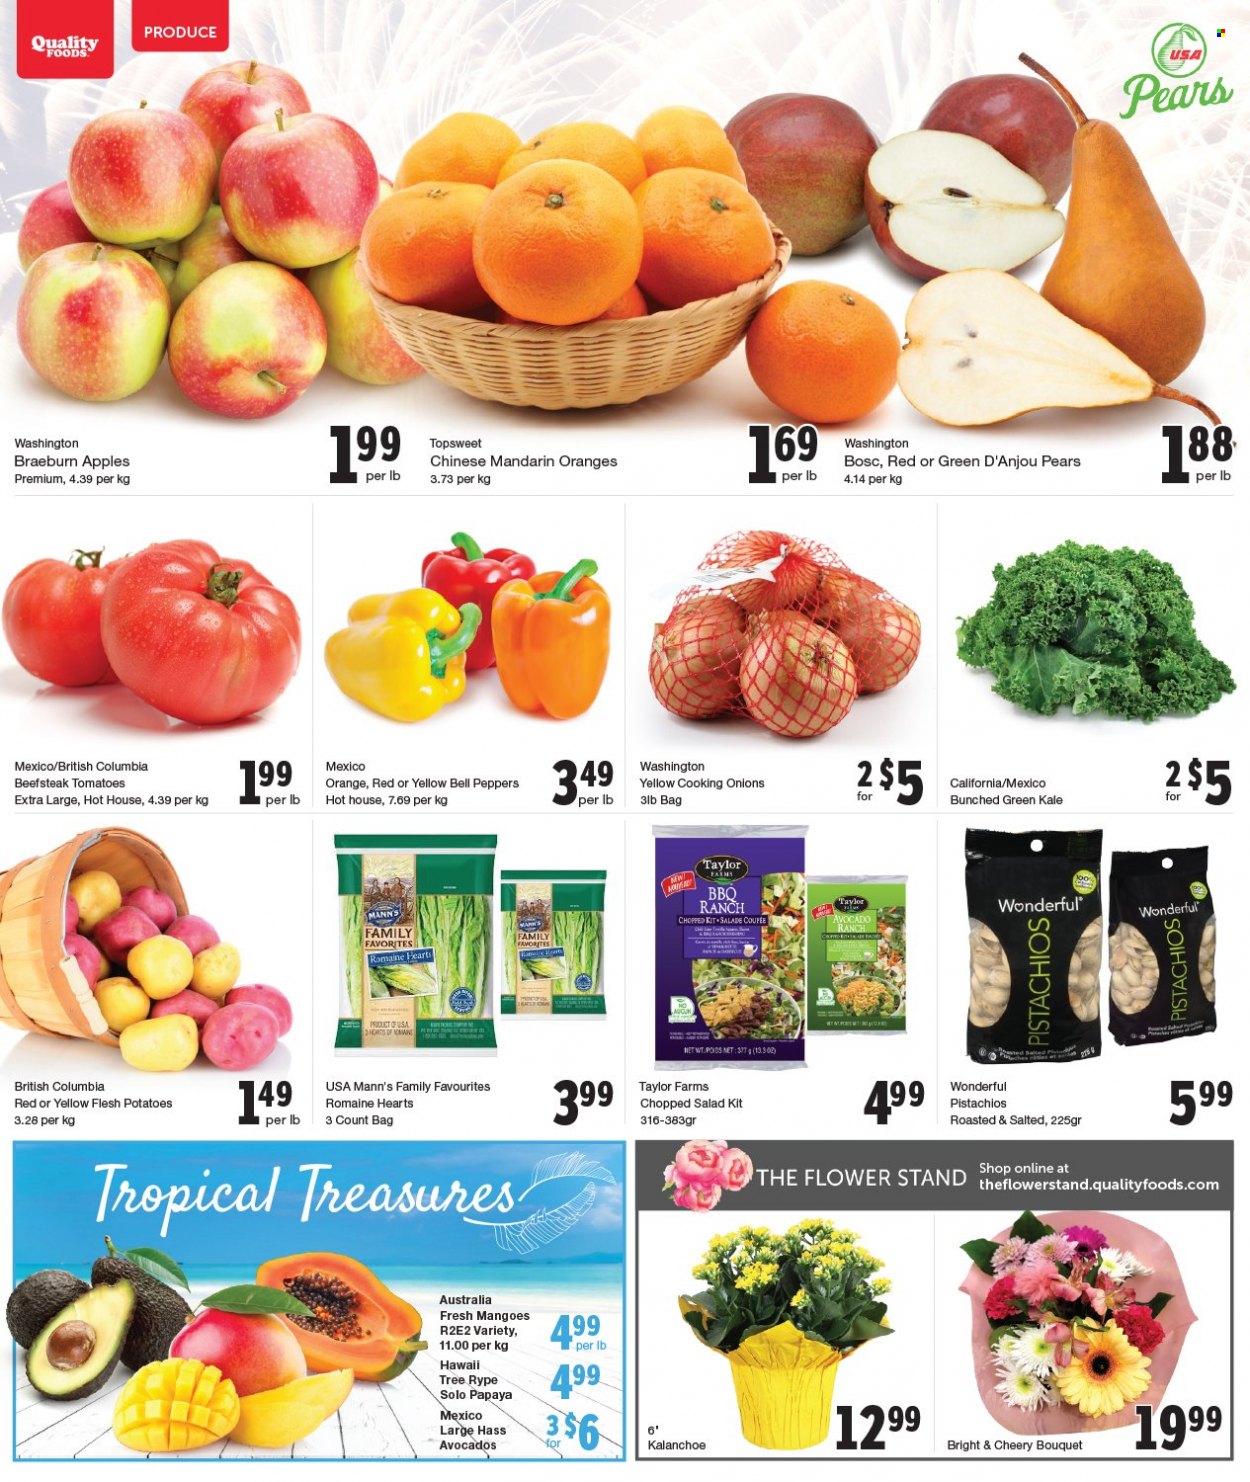 thumbnail - Quality Foods Flyer - December 27, 2021 - January 02, 2022 - Sales products - bell peppers, tomatoes, kale, potatoes, onion, salad, peppers, chopped salad, apples, avocado, mandarines, mango, papaya, pears, pistachios. Page 2.